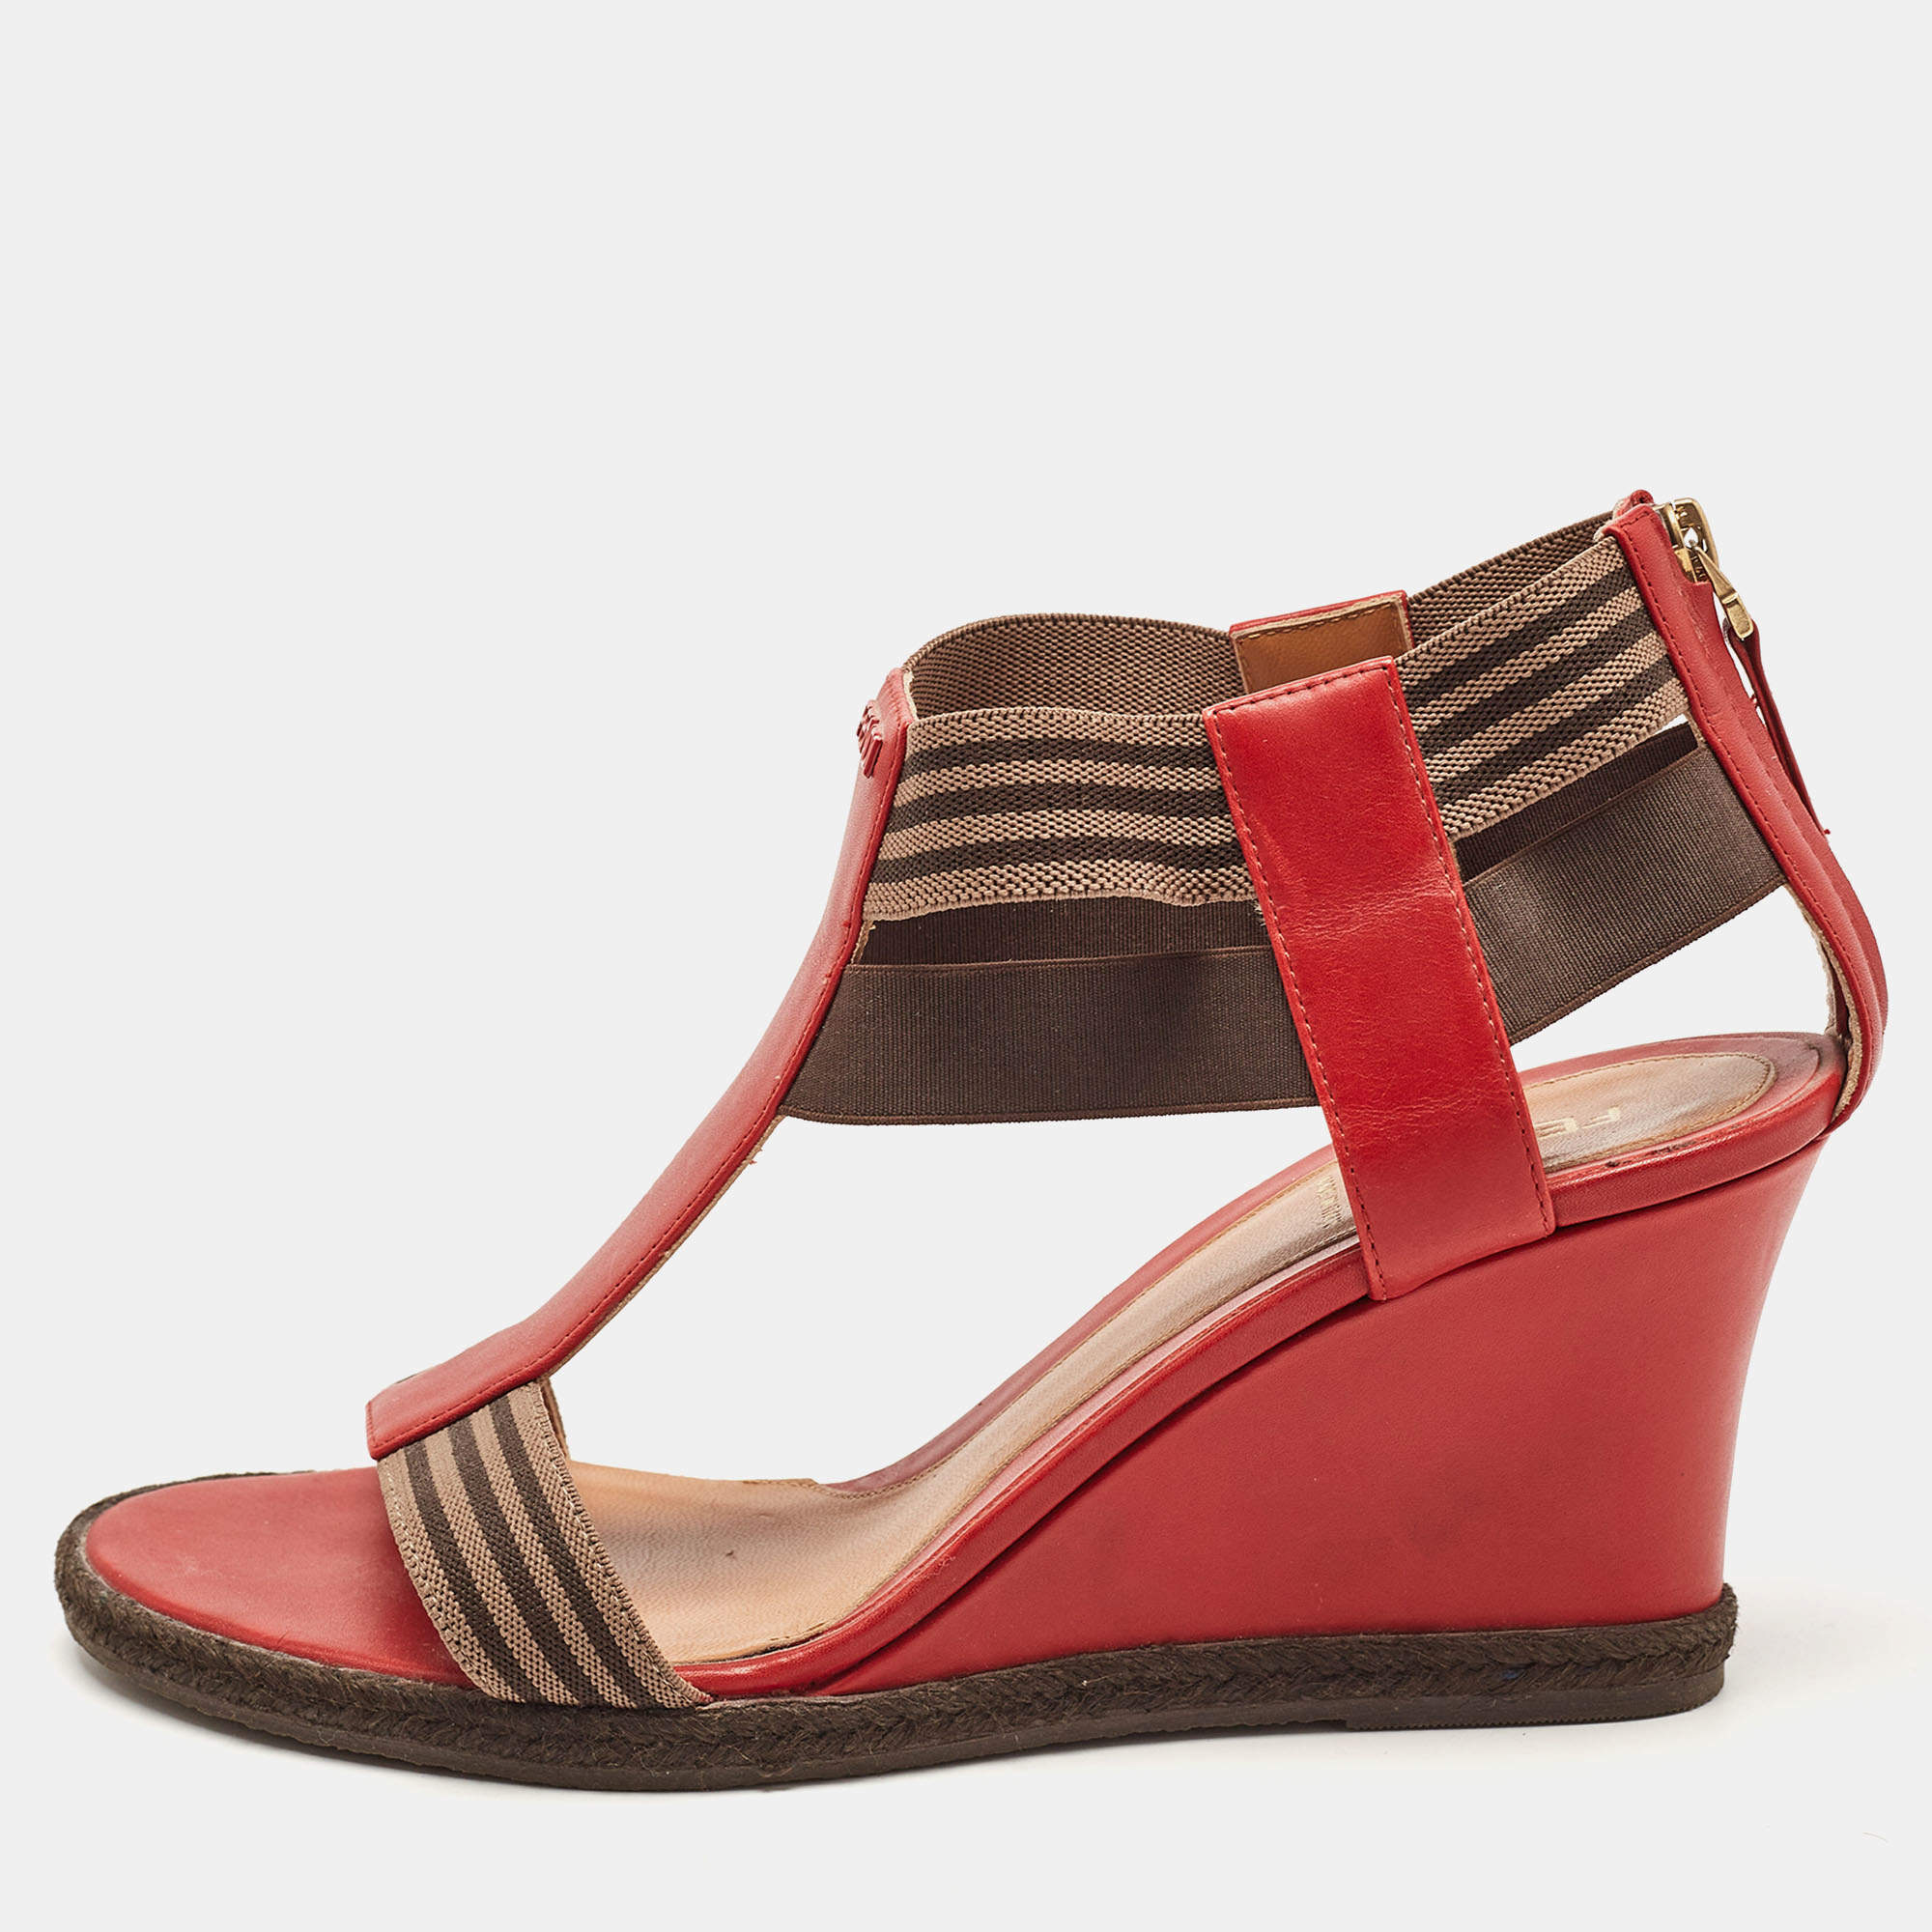 Fendi Red/Brown Leather and Elastic T-Strap Espadrille Wedge Sandals Size 39